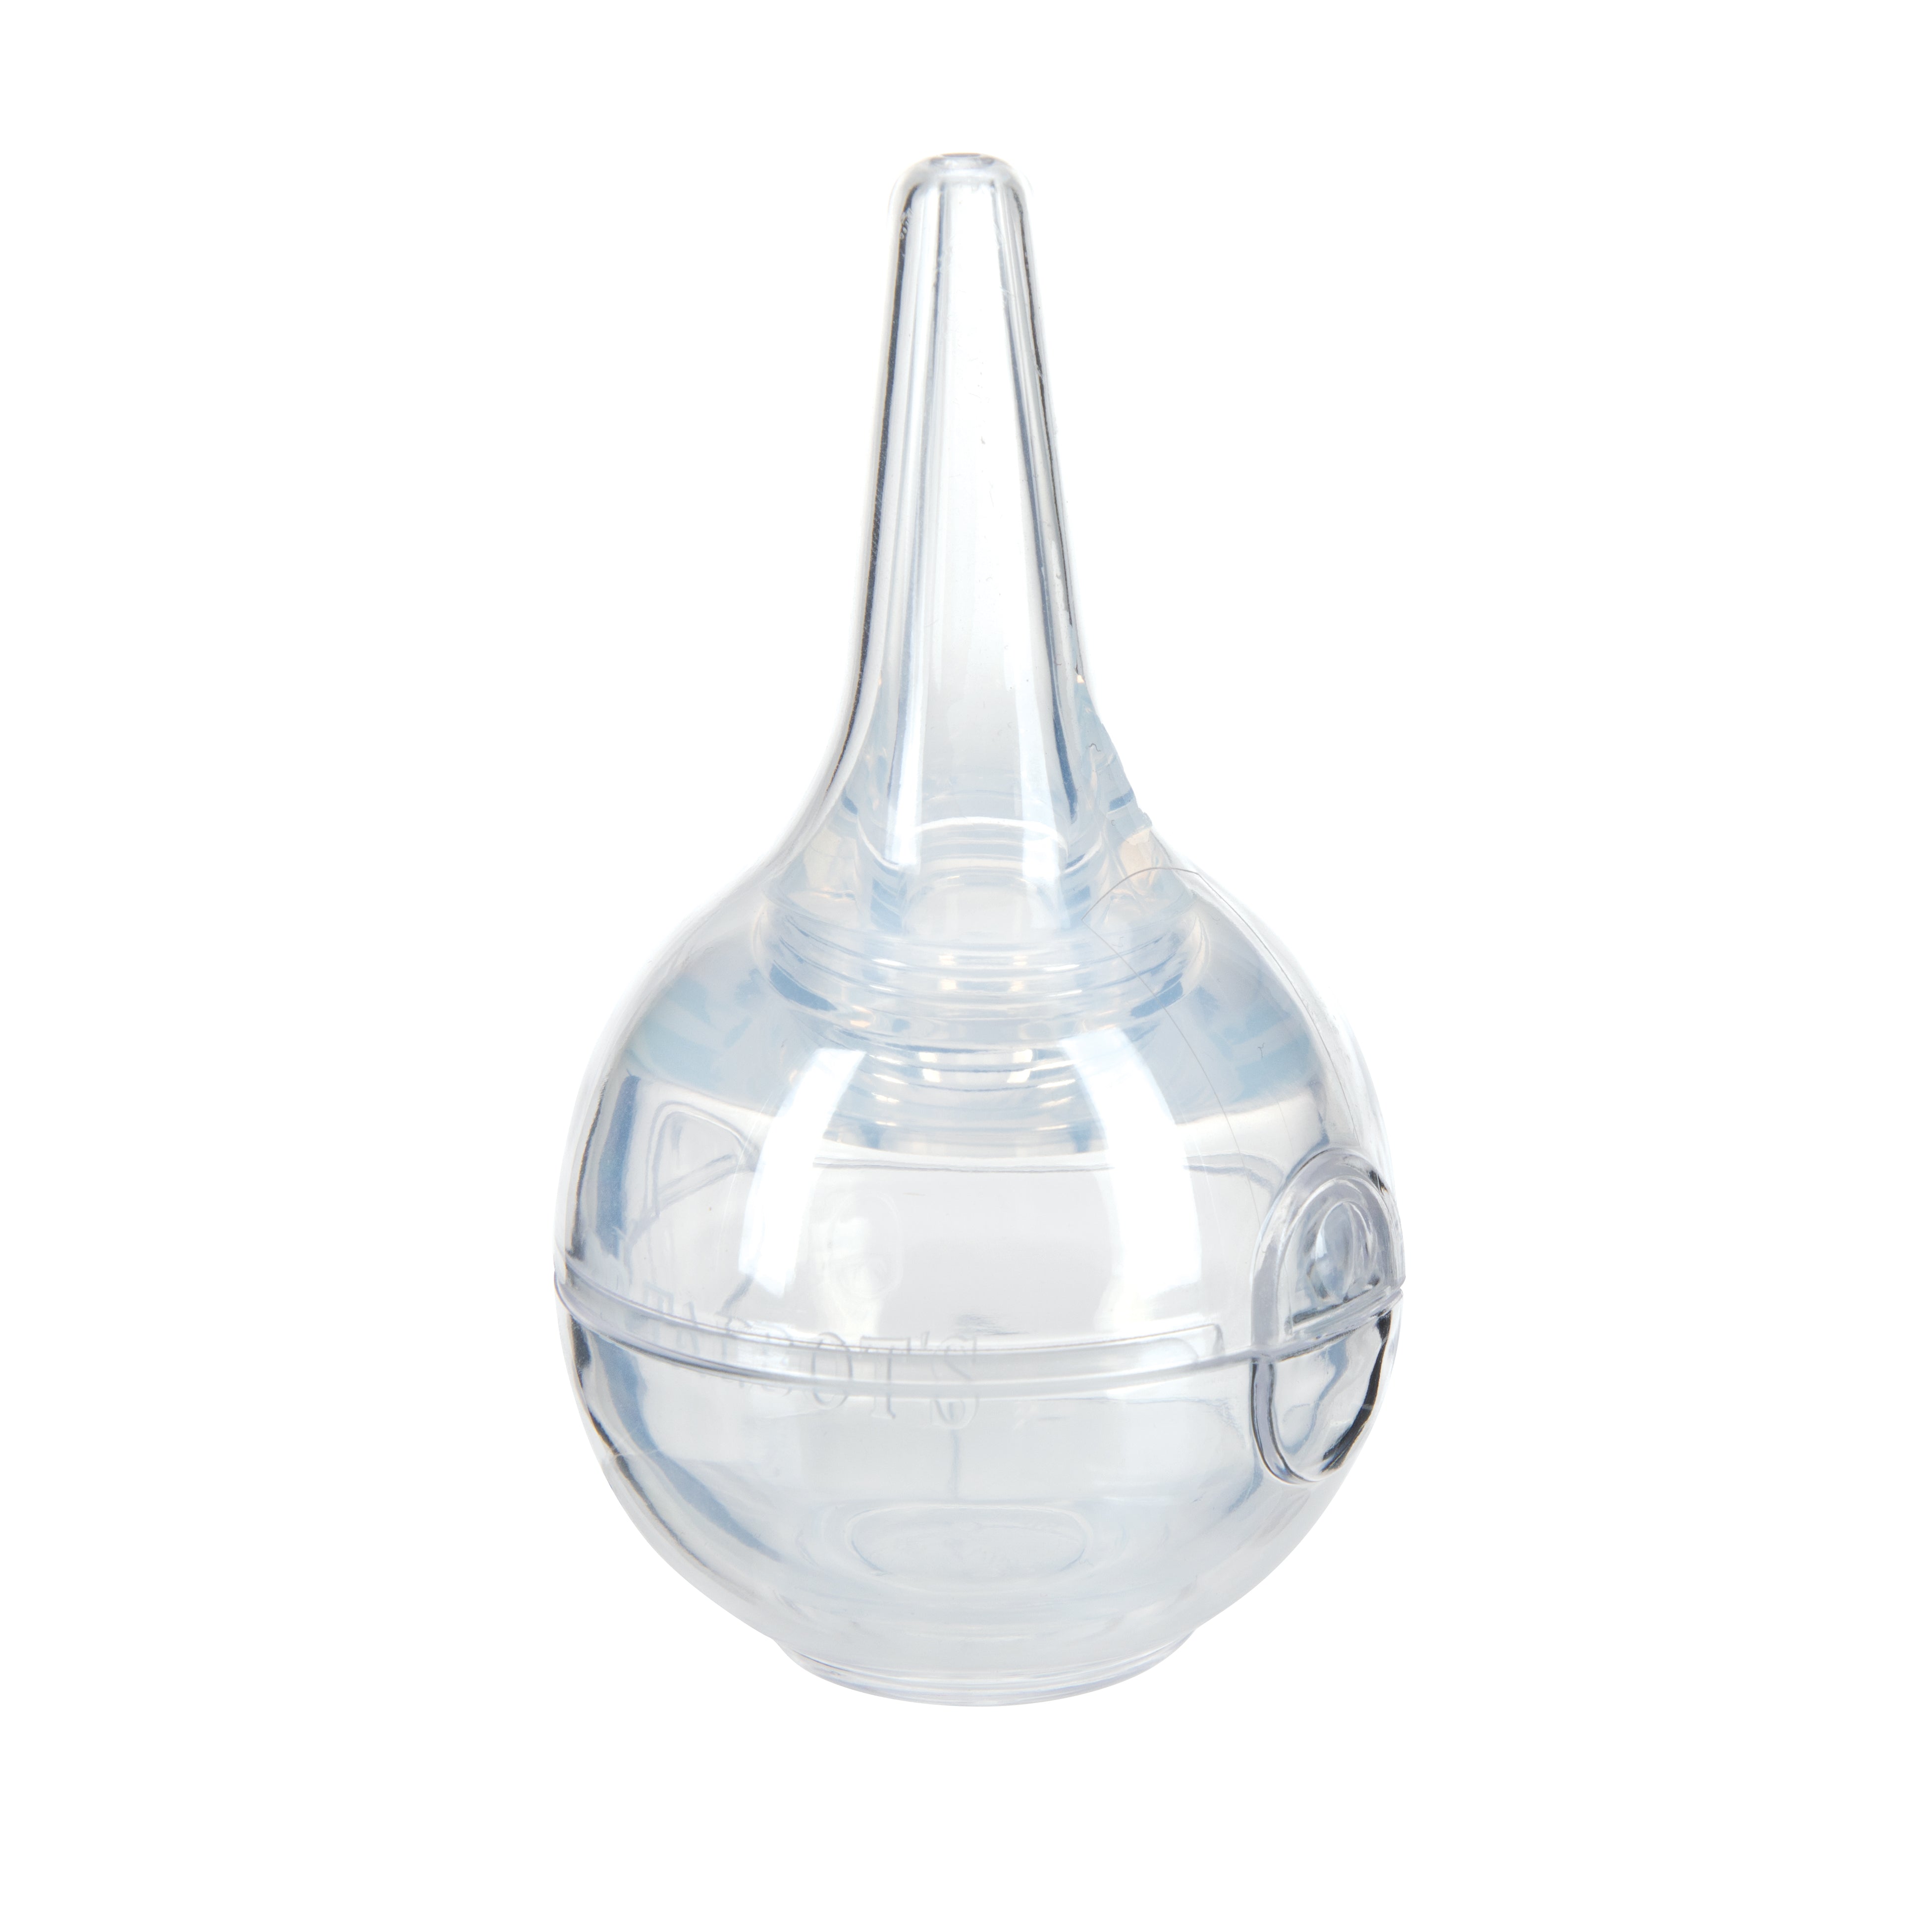 Silicone Nasal Aspirator Bulb with Case – Dr Talbot's US